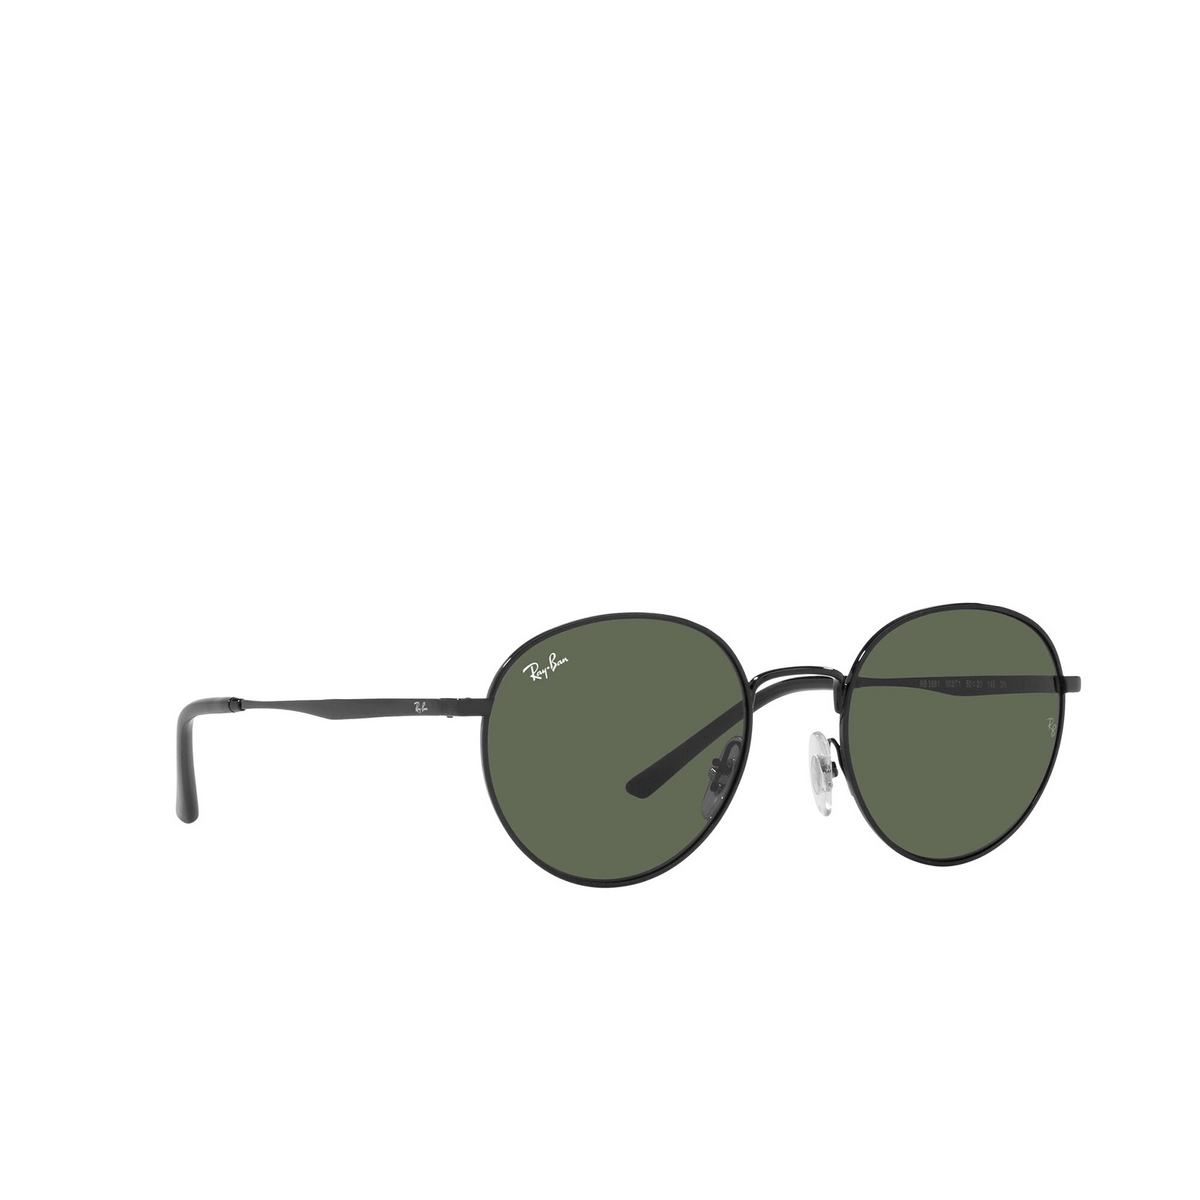 Ray-Ban® Round Sunglasses: RB3681 color Black 002/71 - three-quarters view.